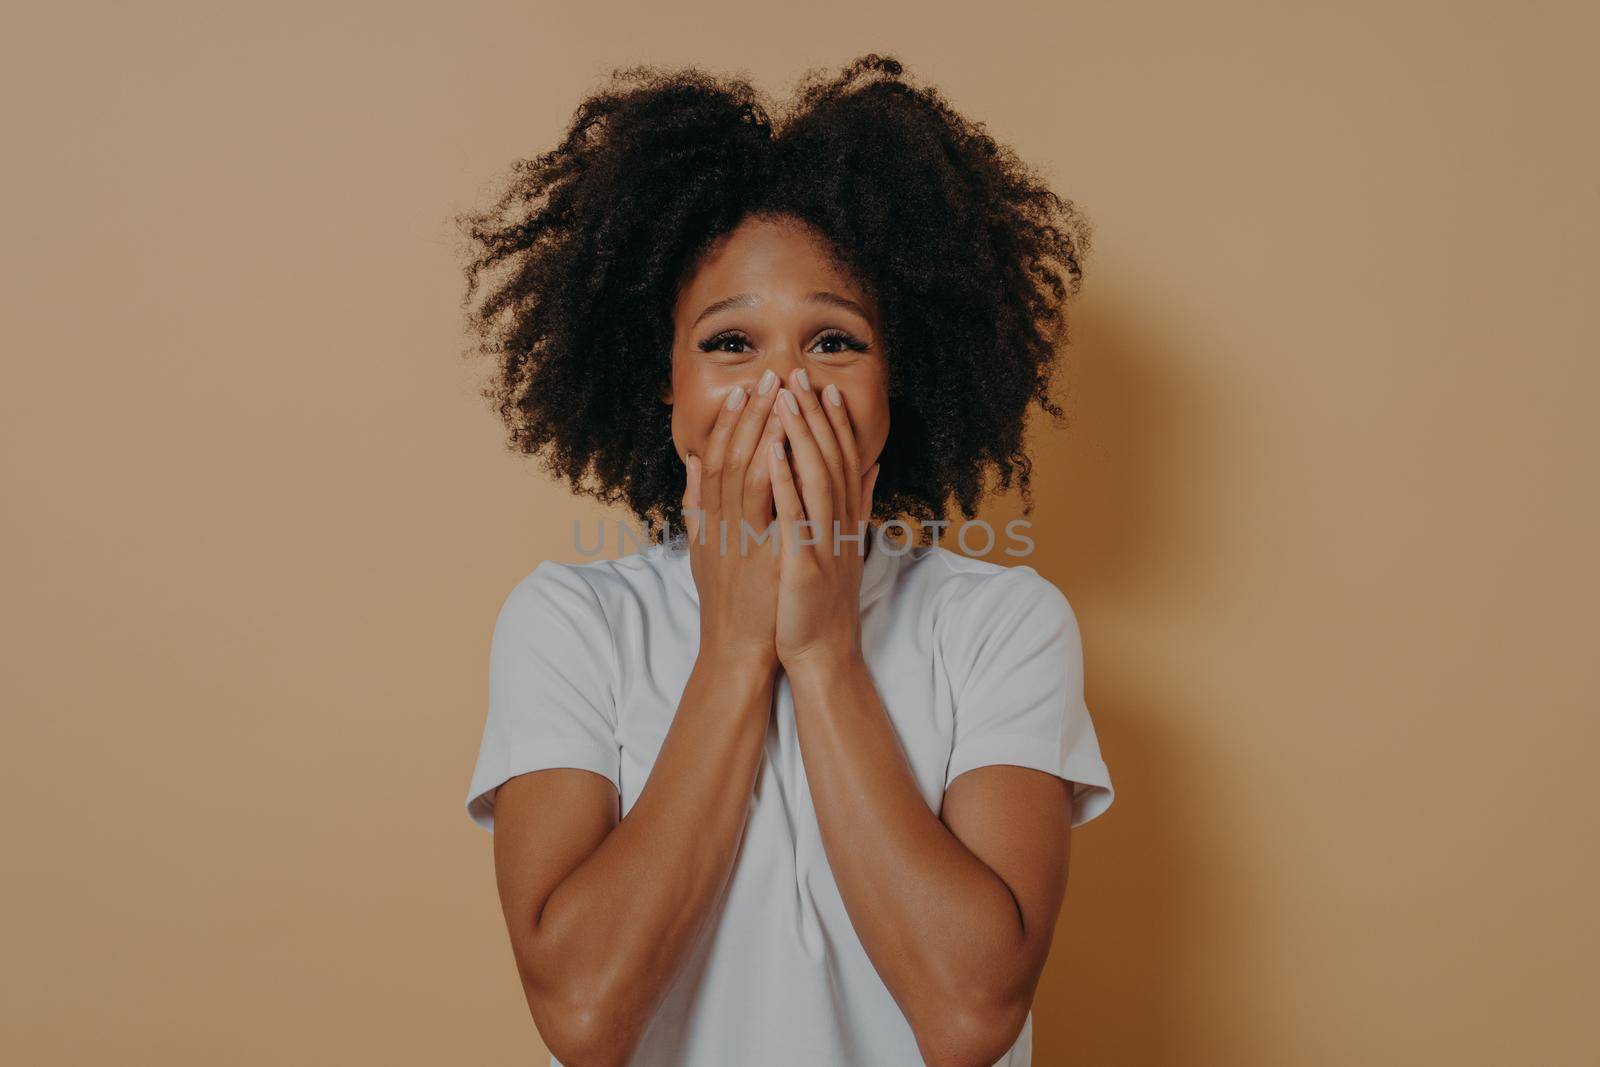 Surprised excited dark skinned woman in white tshirt covering her mouth with hands isolated on pastel beige background with copy space. Positive women emotions and body language concept